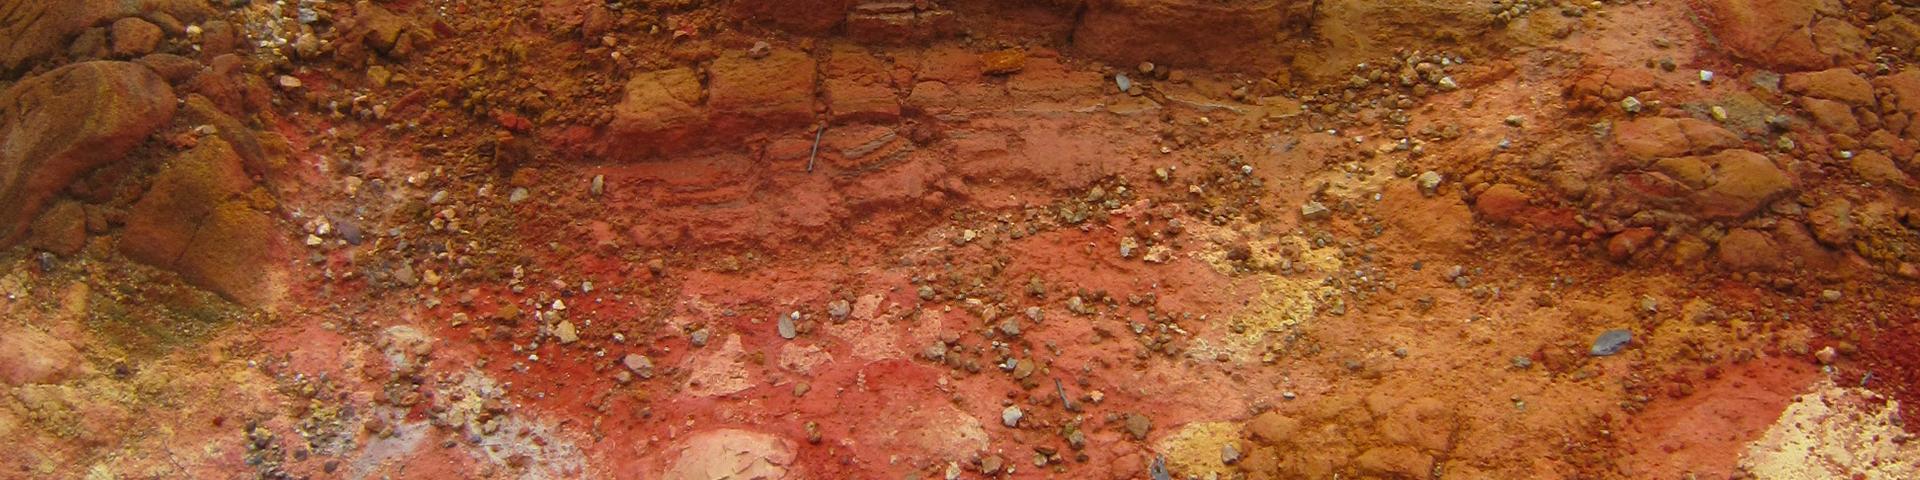 Red hydrothermal alteration, Indonesia